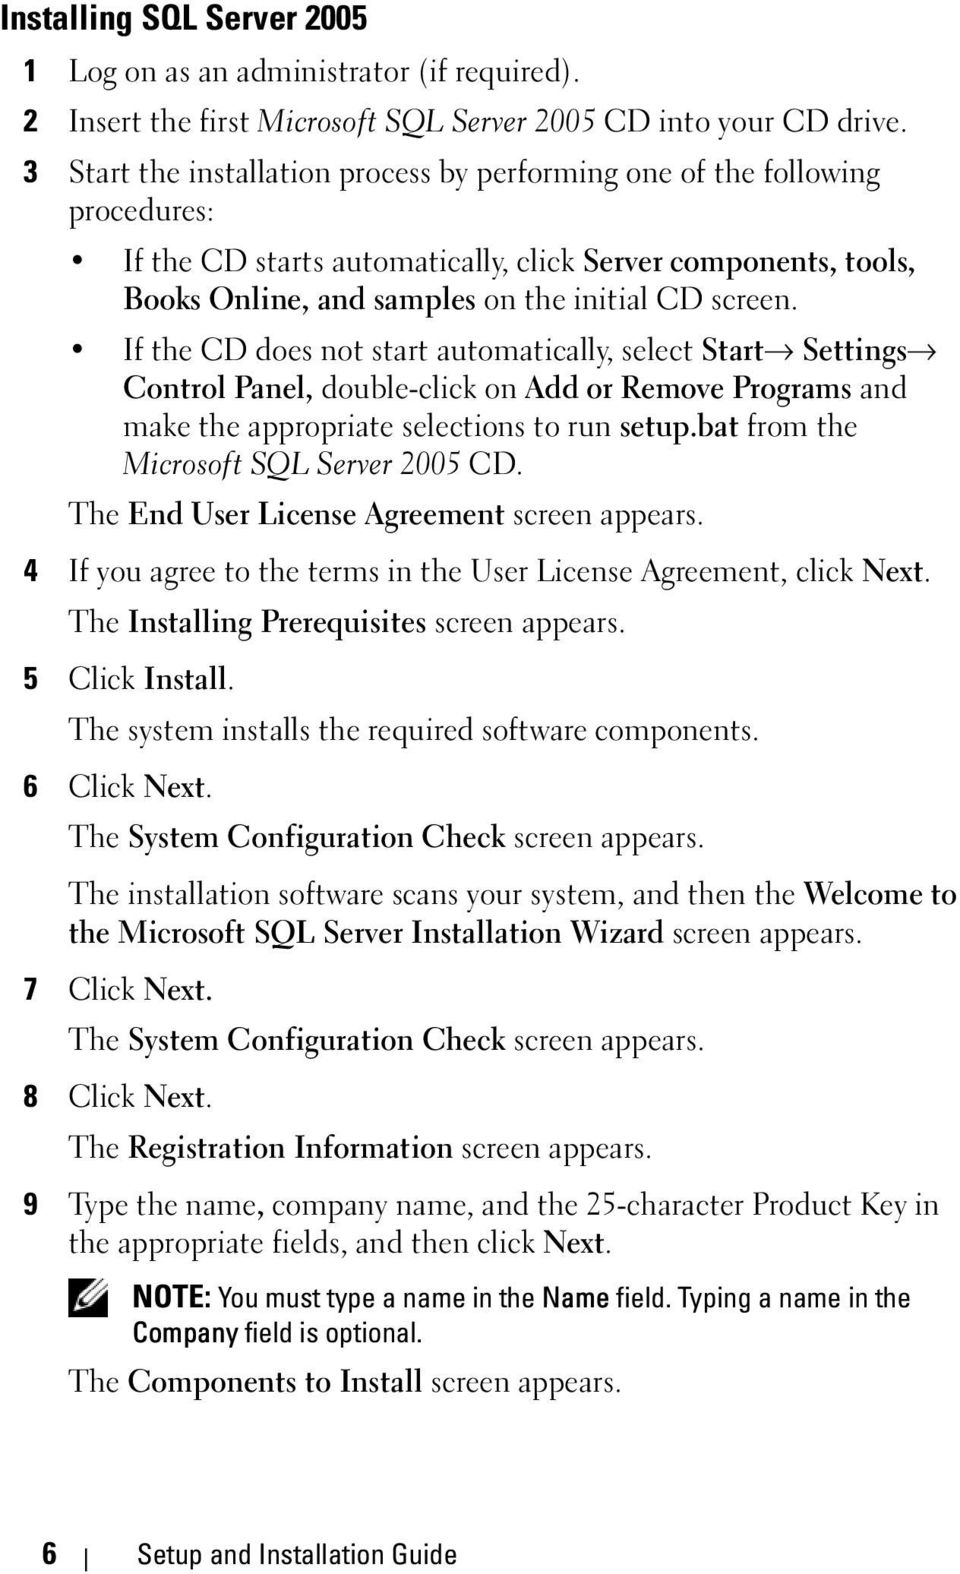 If the CD does not start automatically, select Start Settings Control Panel, double-click on Add or Remove Programs and make the appropriate selections to run setup.